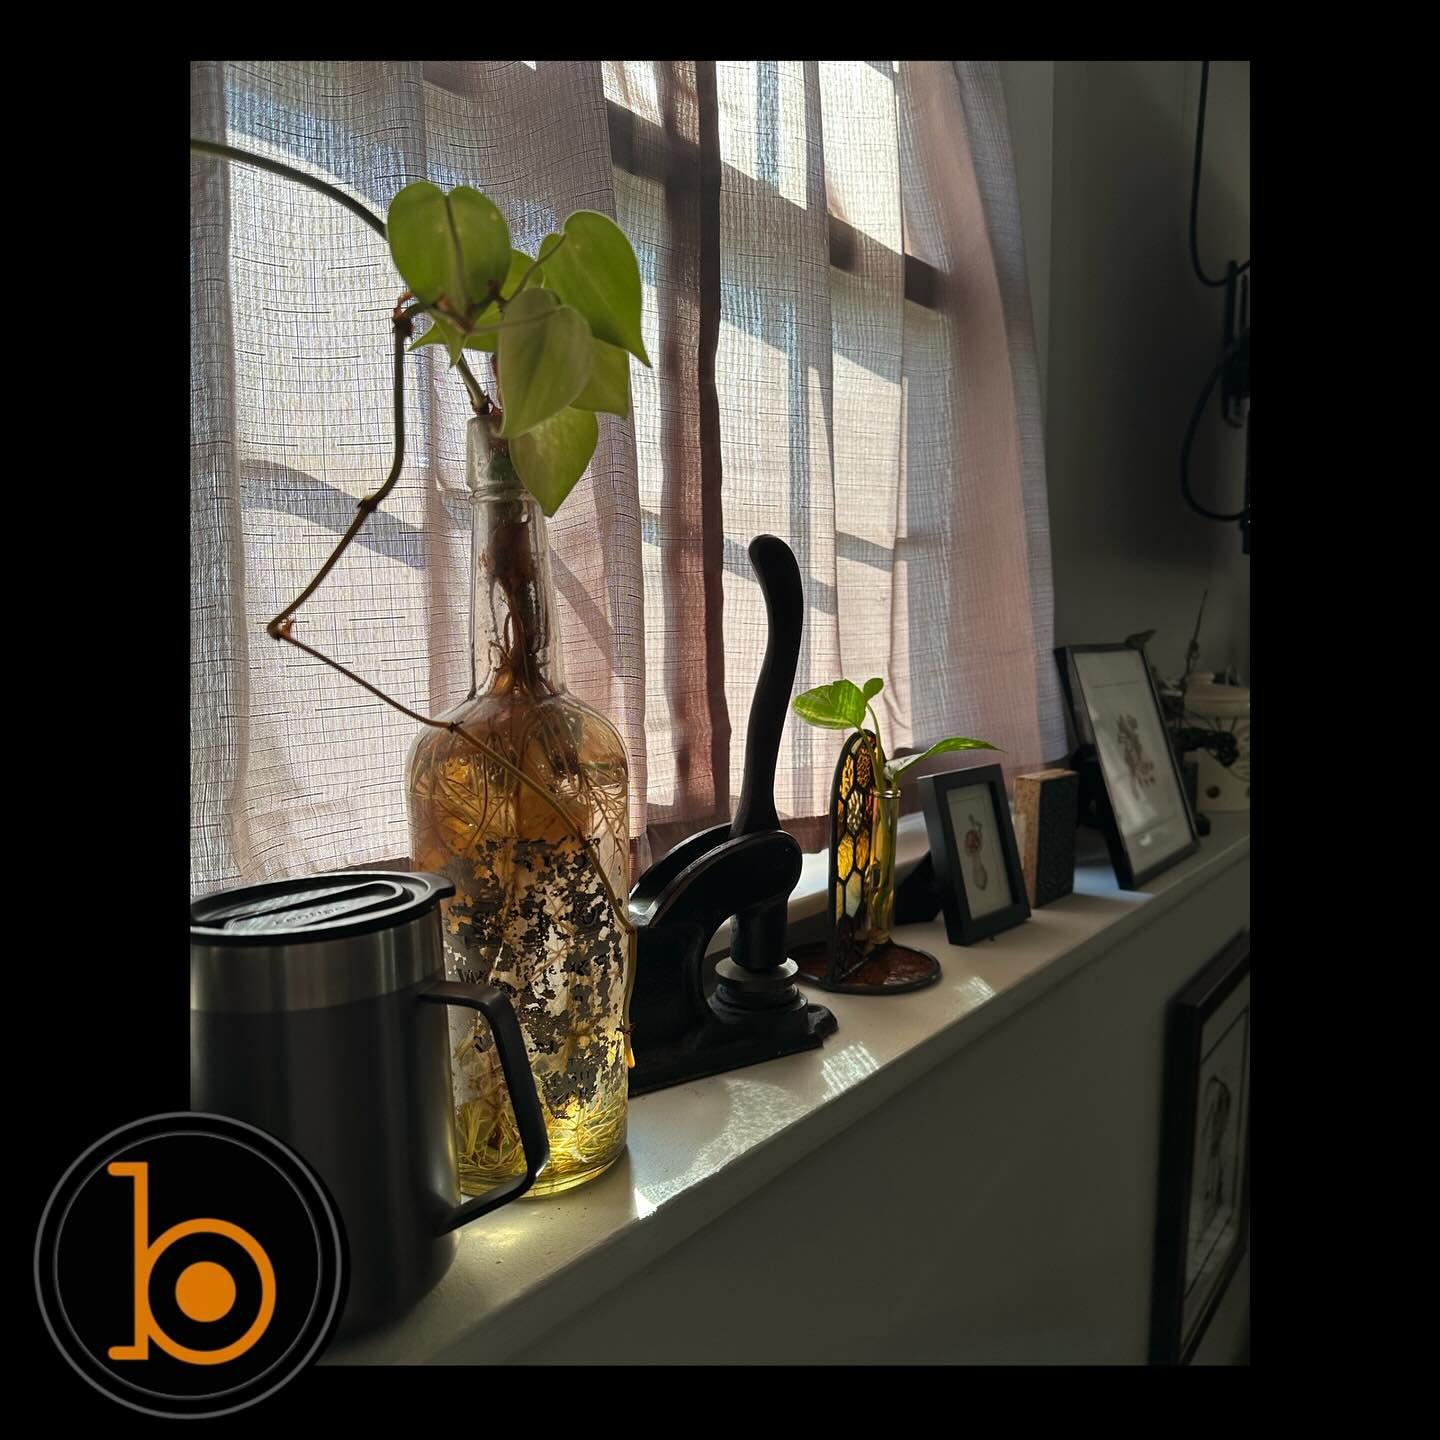 It&rsquo;s another round of &ldquo;whose work space is that?!&rdquo; Any guesses on who works in this space? 
➖➖➖➖➖➖➖➖➖➖➖➖➖➖➖➖➖
Blueprint Gallery
138 Russell St
 Hadley MA 01035
📱(413)-387-0221 
WALK-INS WELCOME 
🕸️ www.blueprintgallery.com 🕸️
.
.